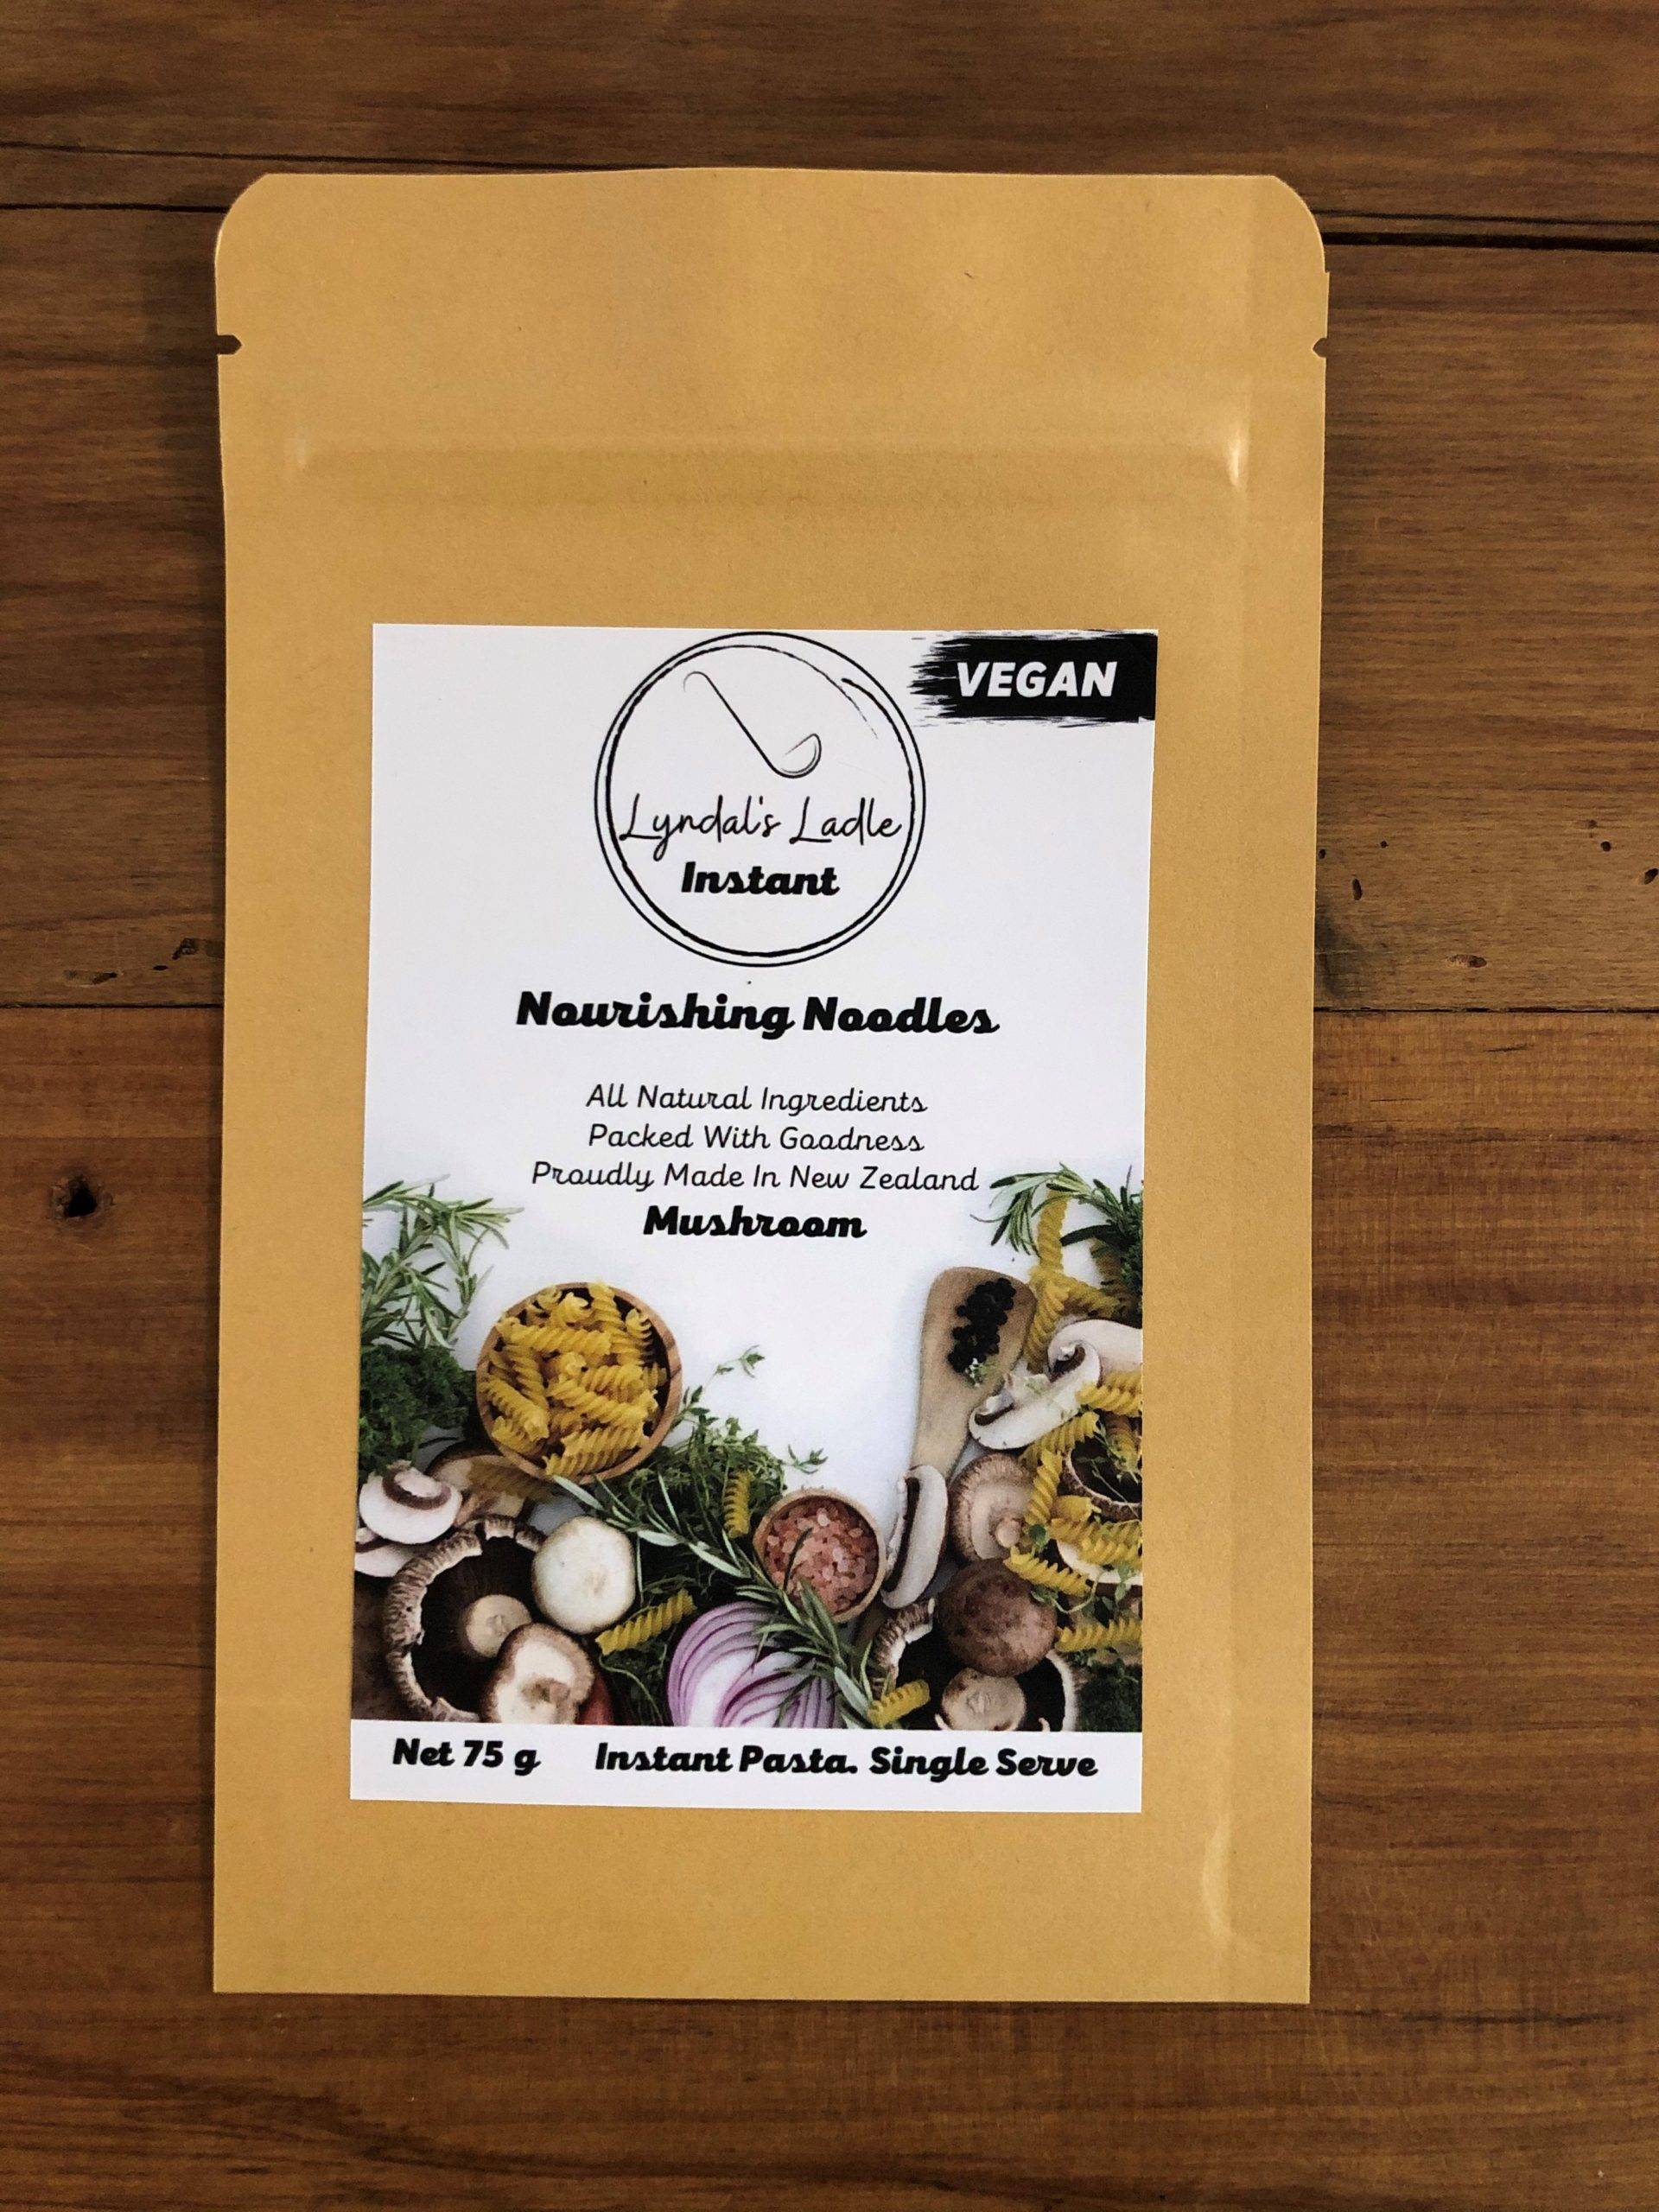 Lyndal’s Ladle Vegan Mushroom Nourishing Noodles - Tramping Food and Accessories sold by Venture Outdoors NZ